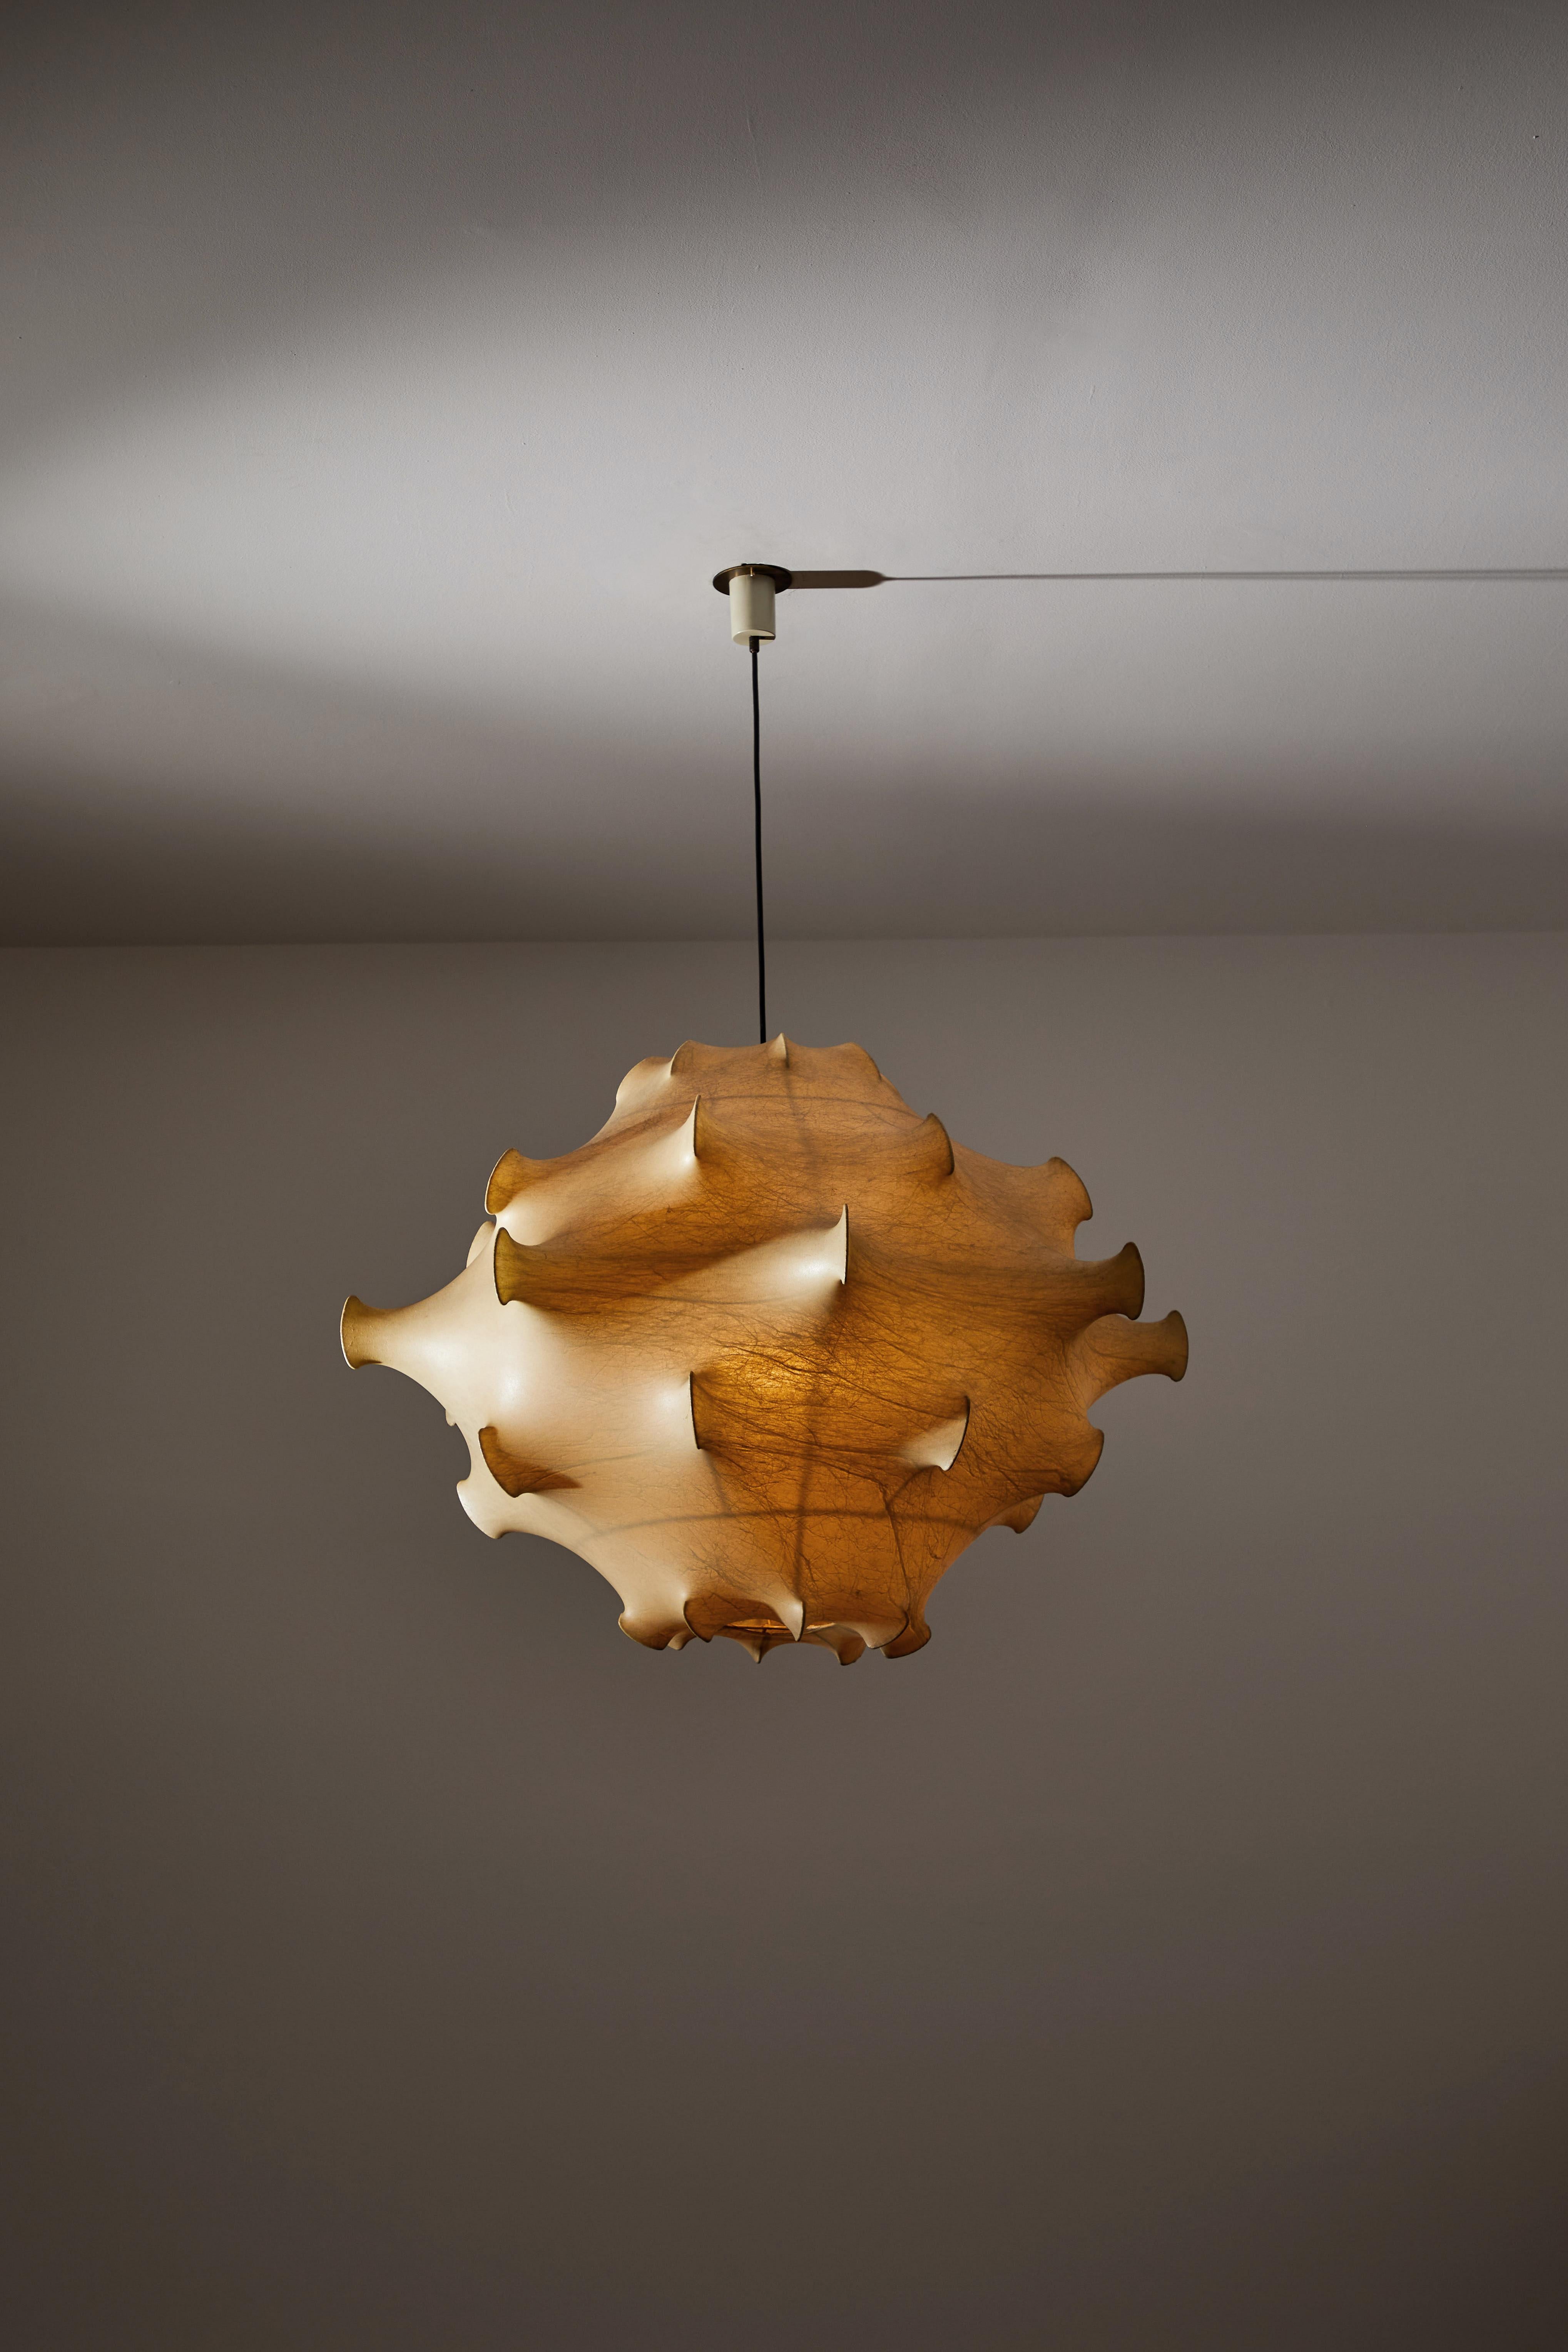 Rare and large Taraxacum suspension light by Achille & Pier Giacomo Castiglioni for Flos. Designed and manufactured in Italy, circa 1960s. Plastic polymer resin applied with spraying technique on to enameled iron frame. Rewired for U.S. standards.